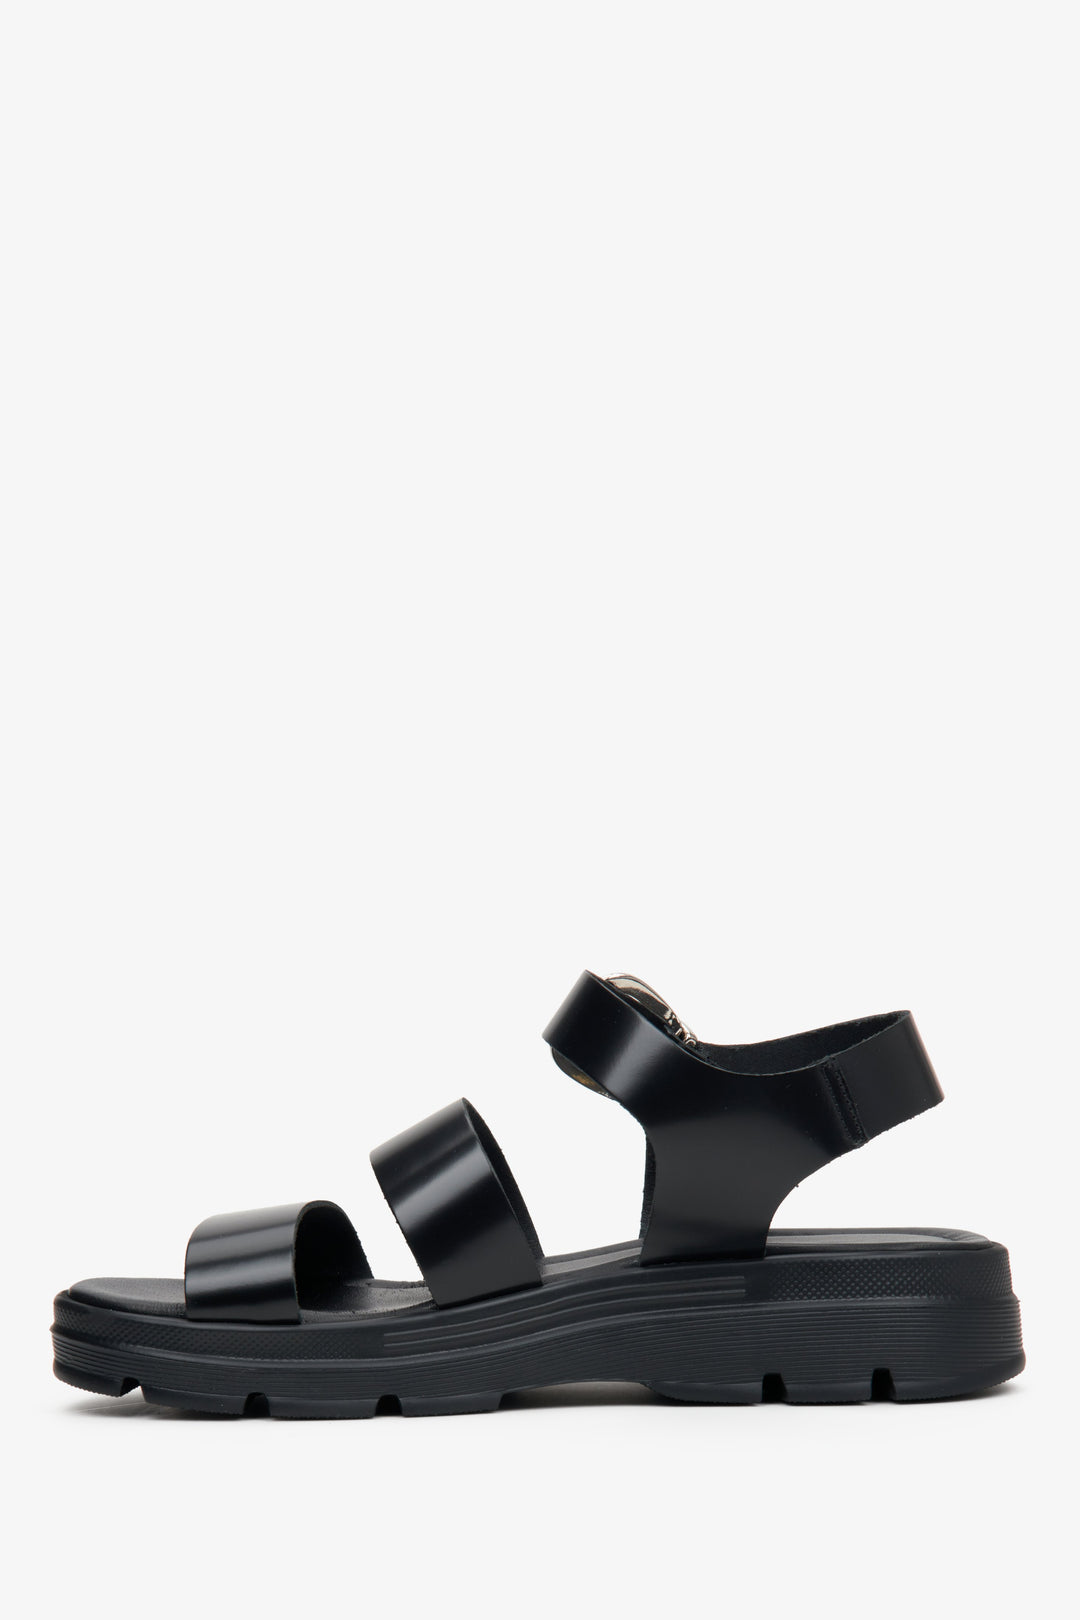 Estro women's thick strappy sandals on a natural leather platform, black.